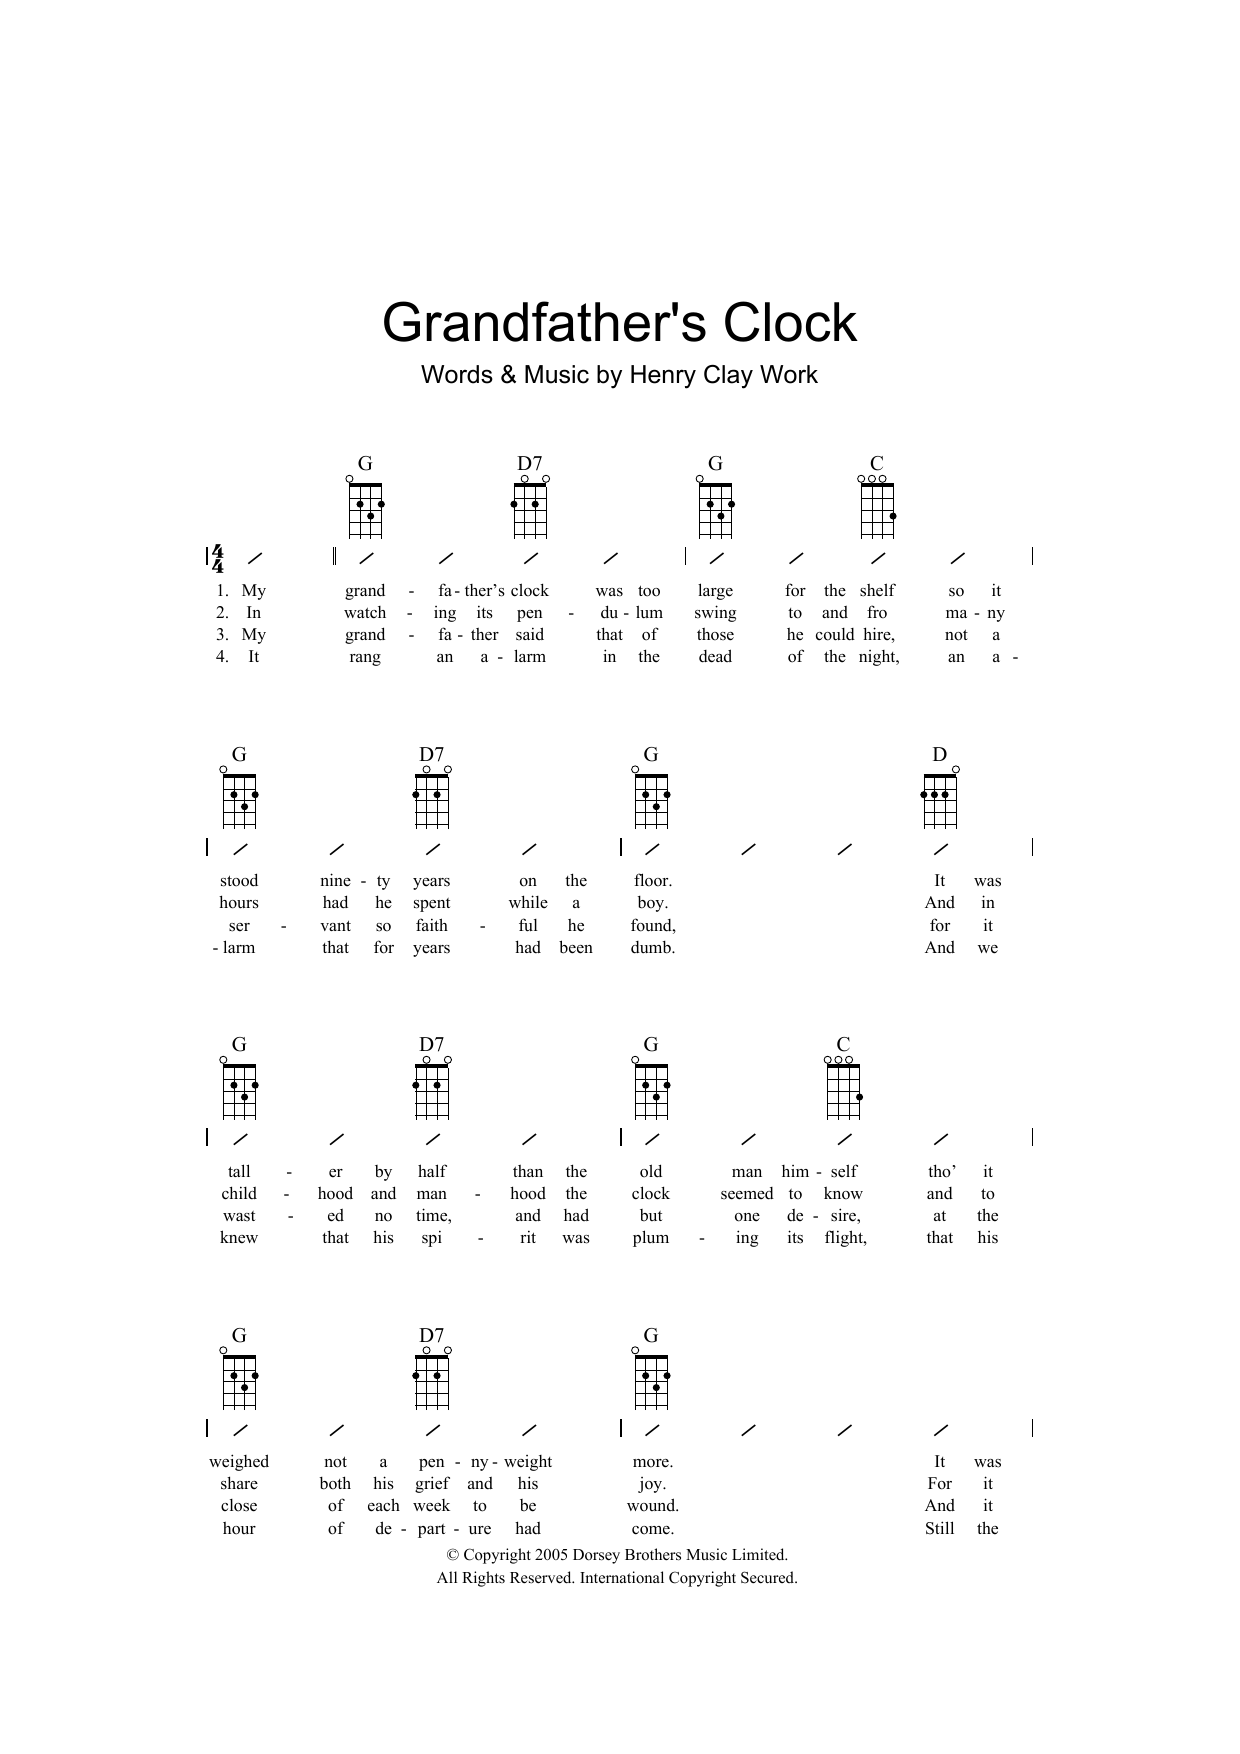 Download Henry Clay Work Grandfather's Clock Sheet Music